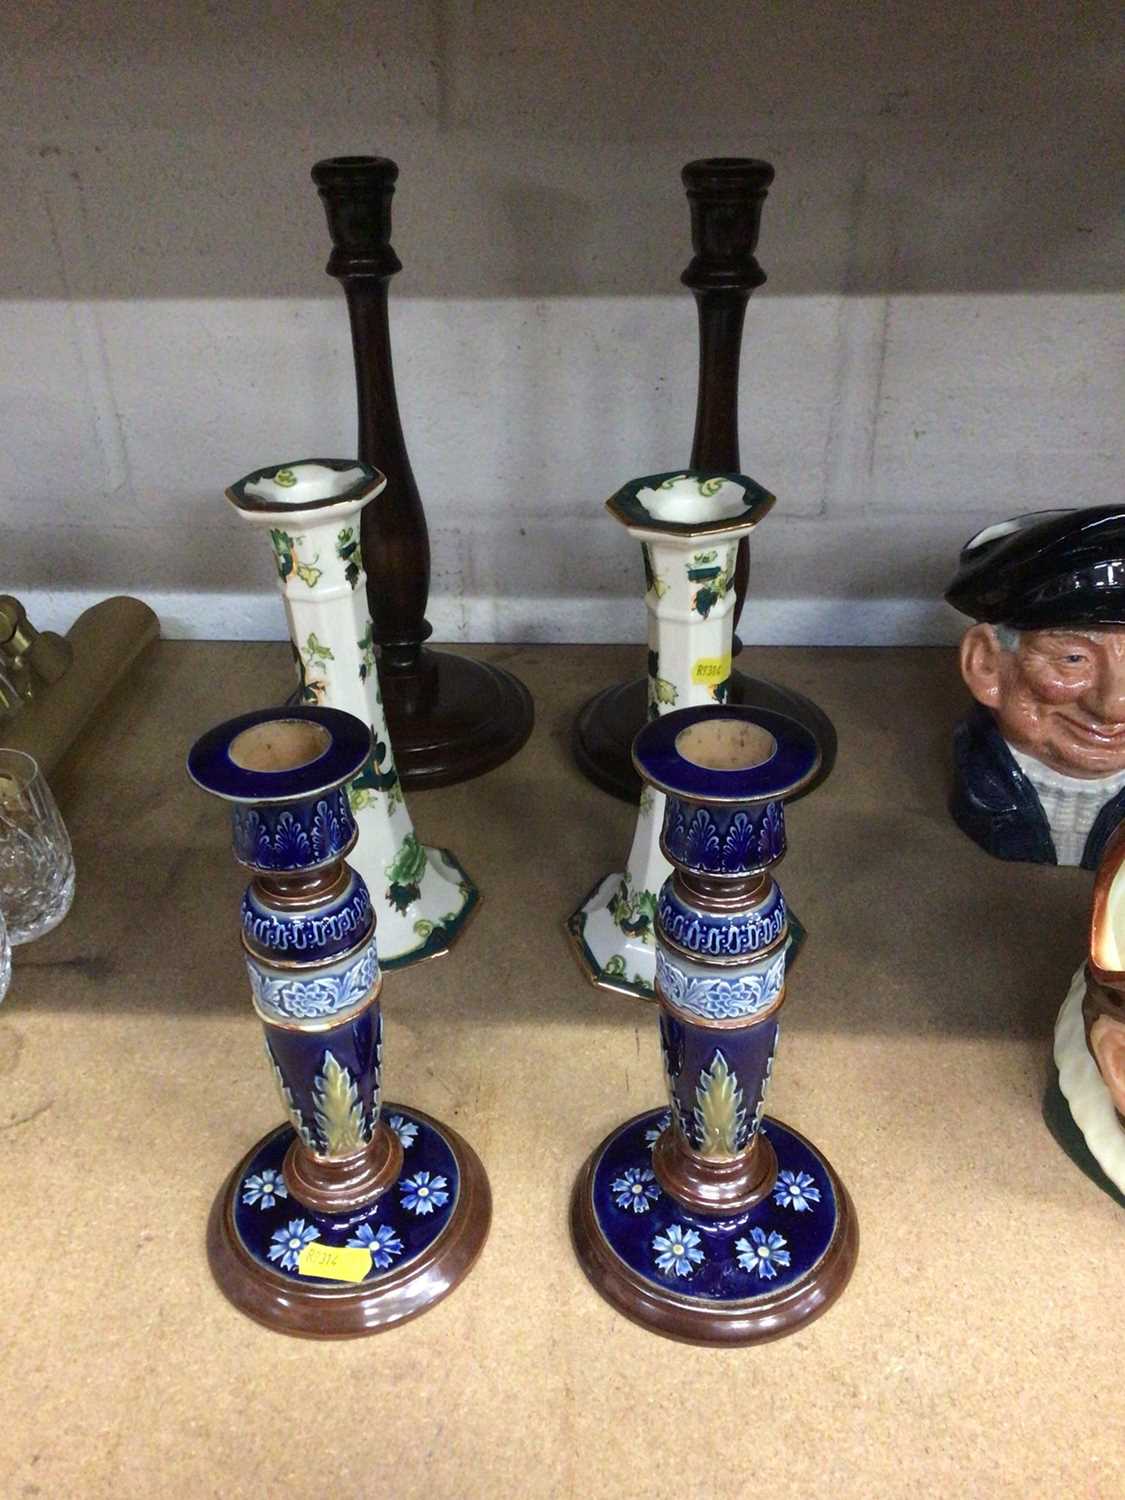 Pair of Doulton Lambeth candlesticks, pair of Mason's Chartreuse candlesticks, and a pair of turned